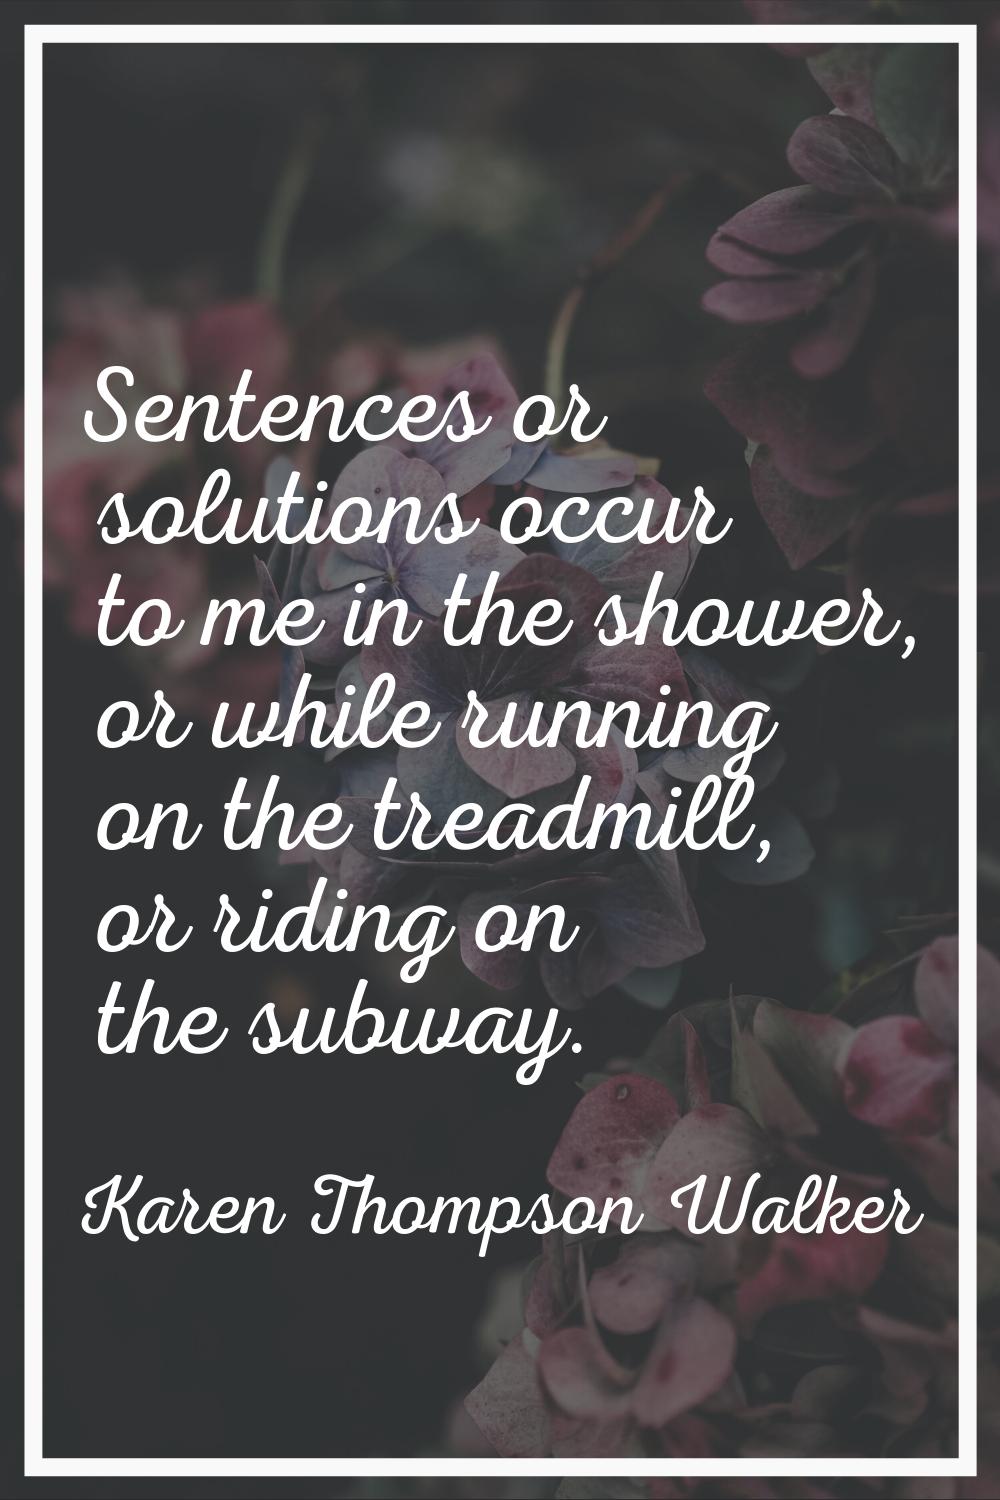 Sentences or solutions occur to me in the shower, or while running on the treadmill, or riding on t